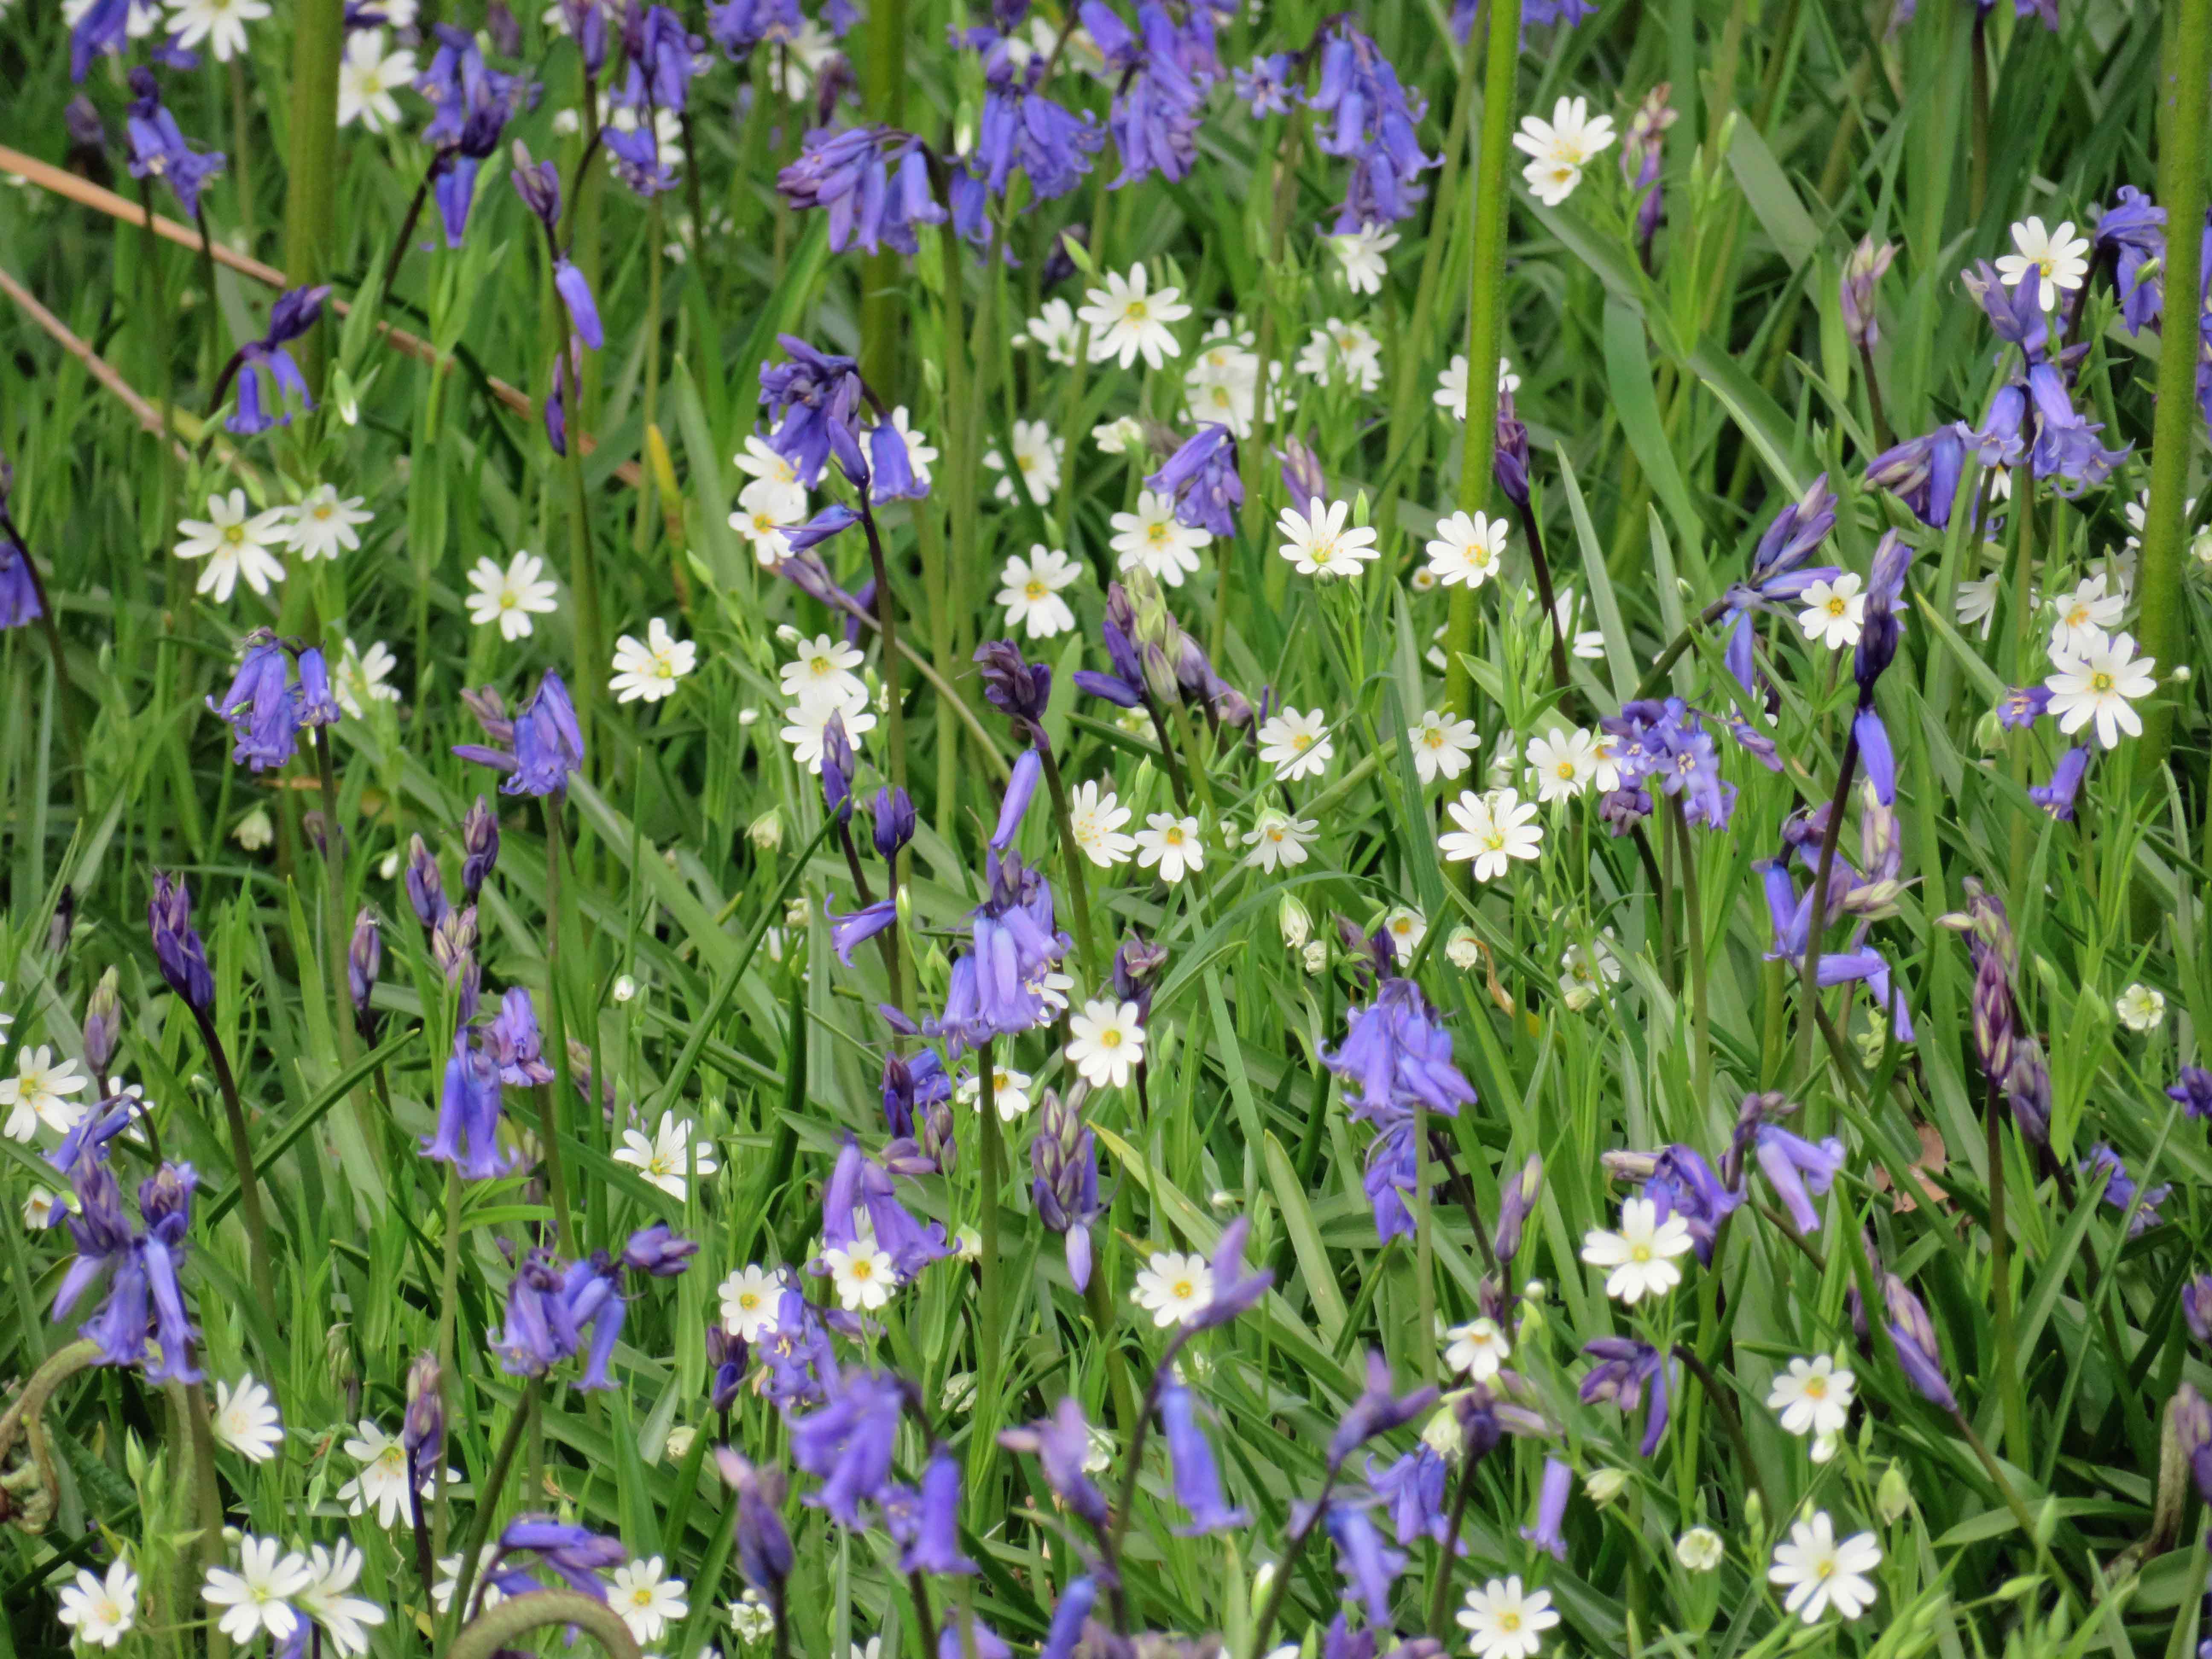 Bluebells and greater stitchwort